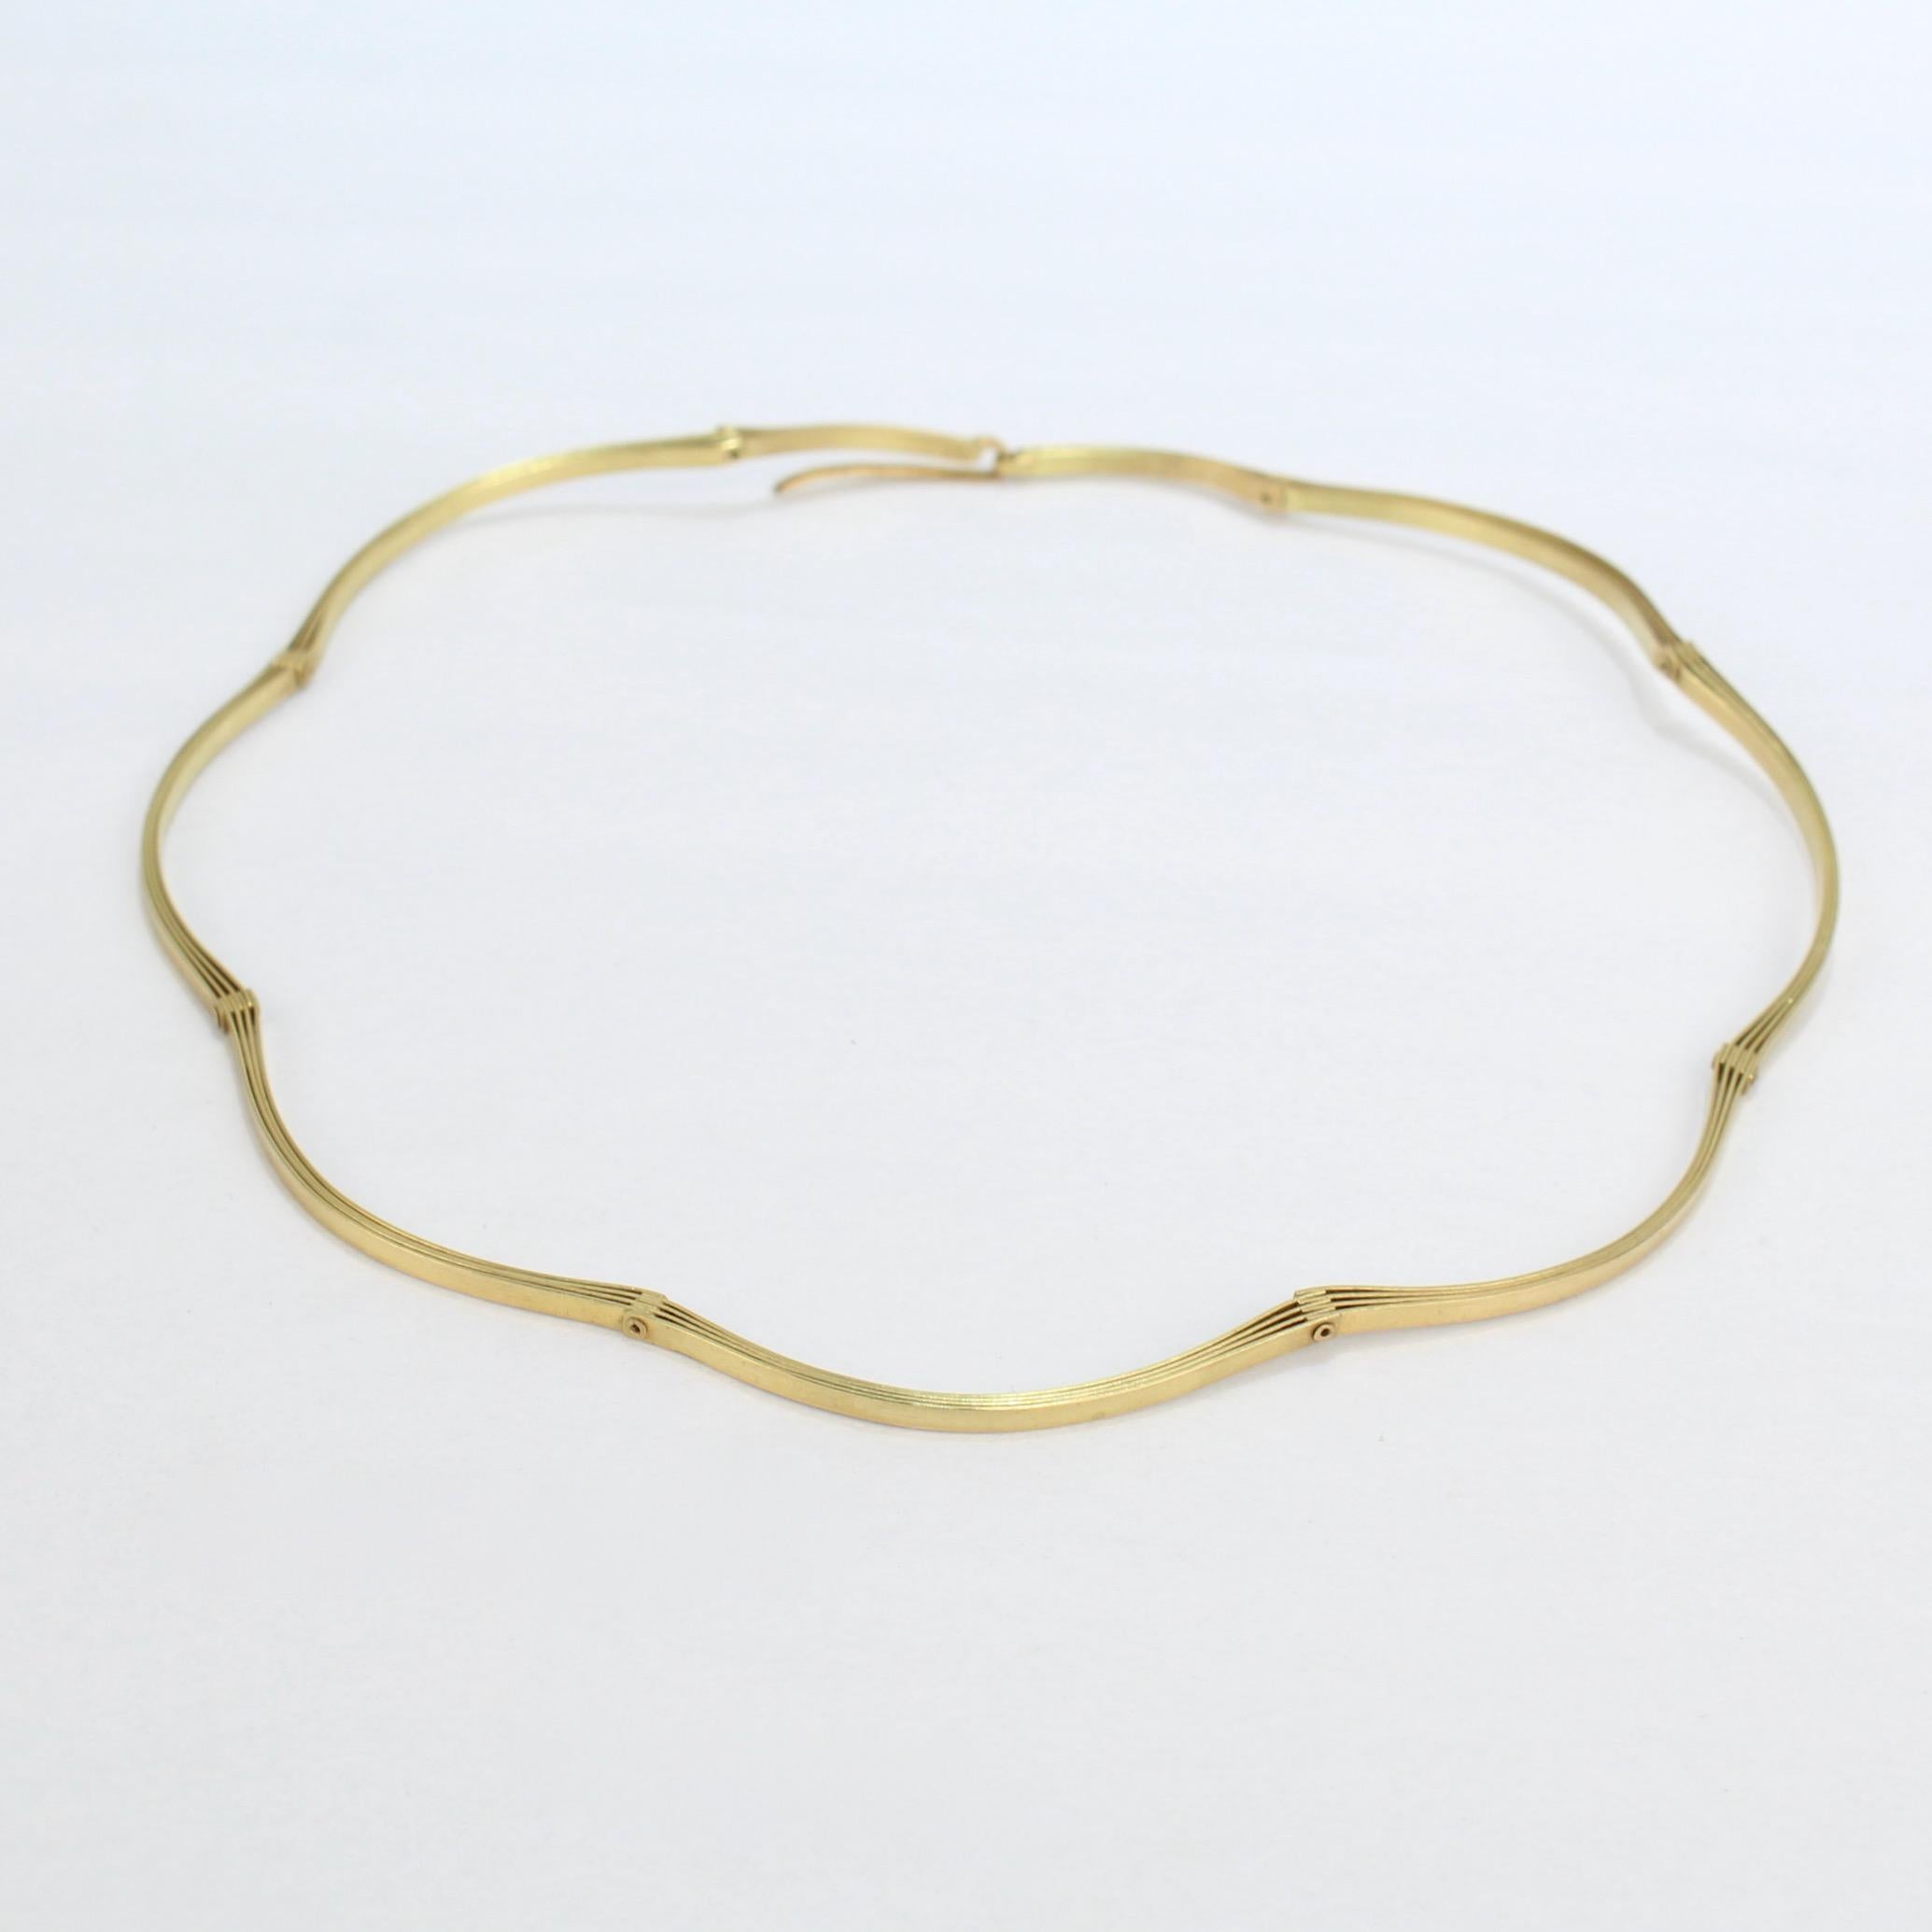 A very fine Modernist 19k gold handmade choker necklace.

Each link is comprised of three layers of gold strips riveted together with moveable hinges.  

Simply a great piece of artisan or studio jewelry!

Date:
20th Century

Overall Condition:
It